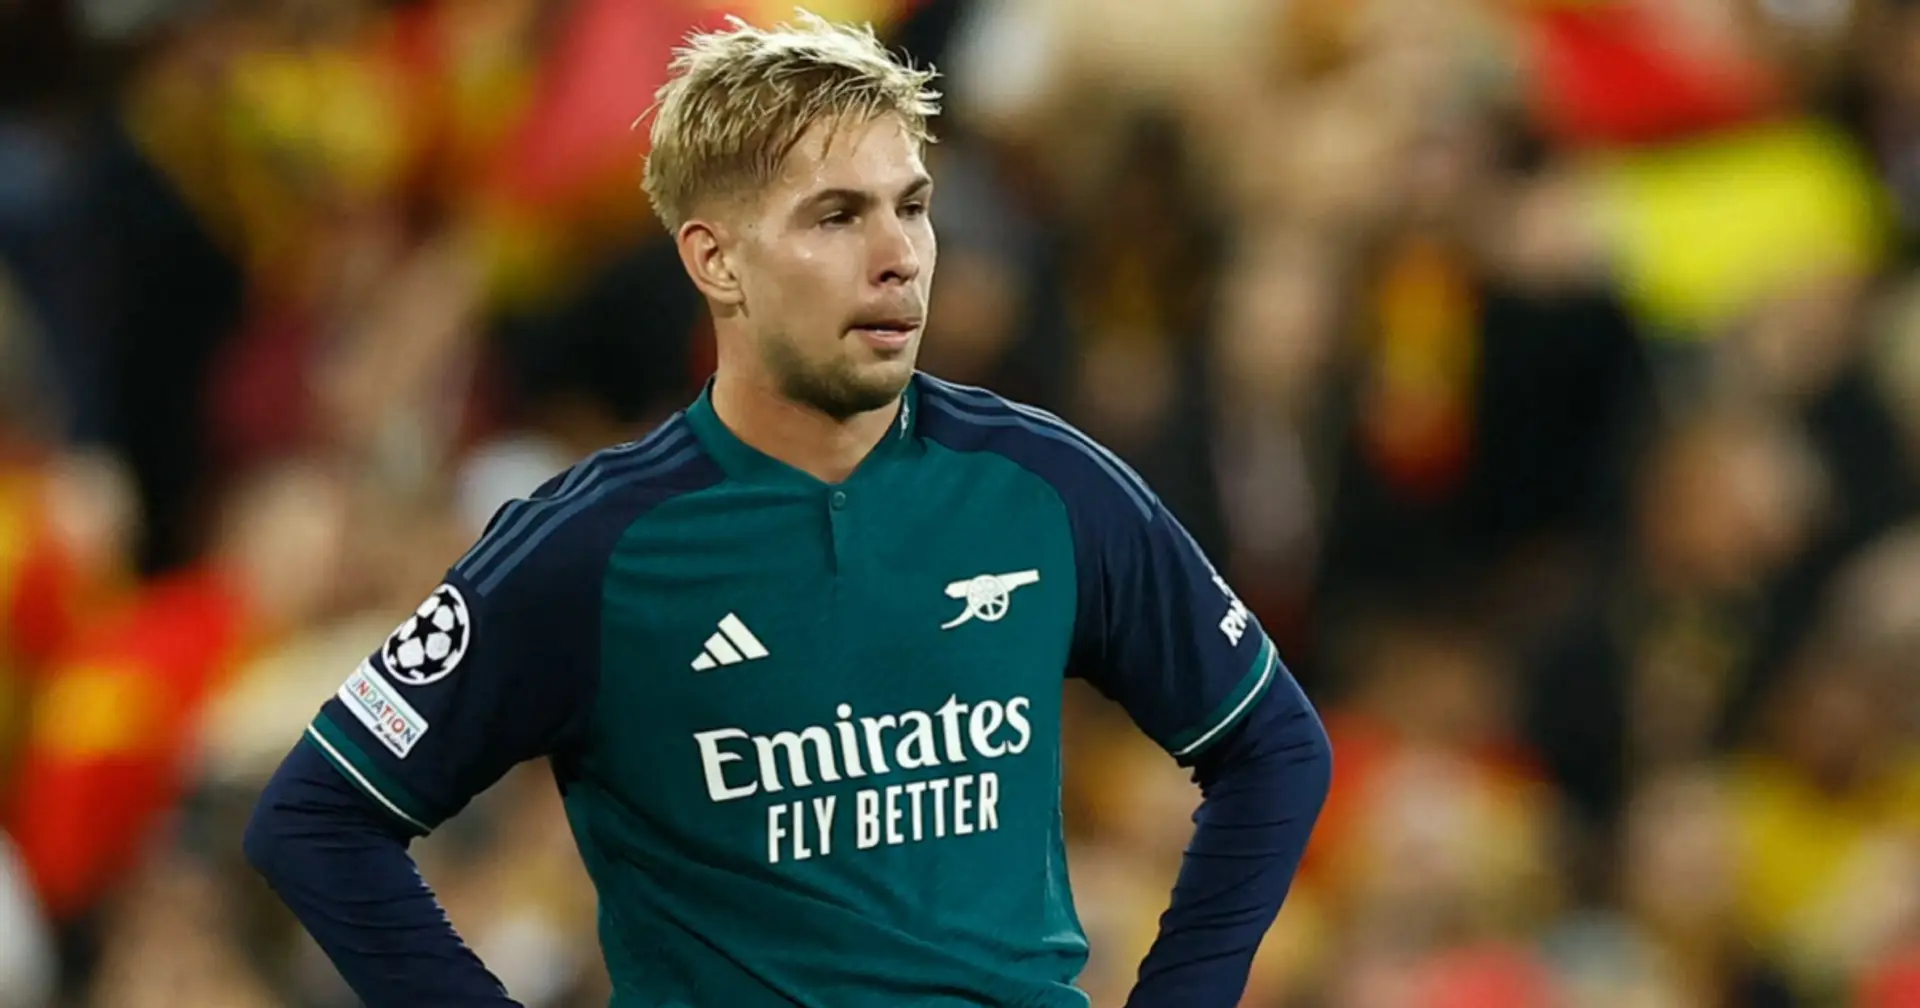 Arsenal ready to part ways with Emile Smith Rowe — one Premier League club is already interested (reliability: 3 stars)